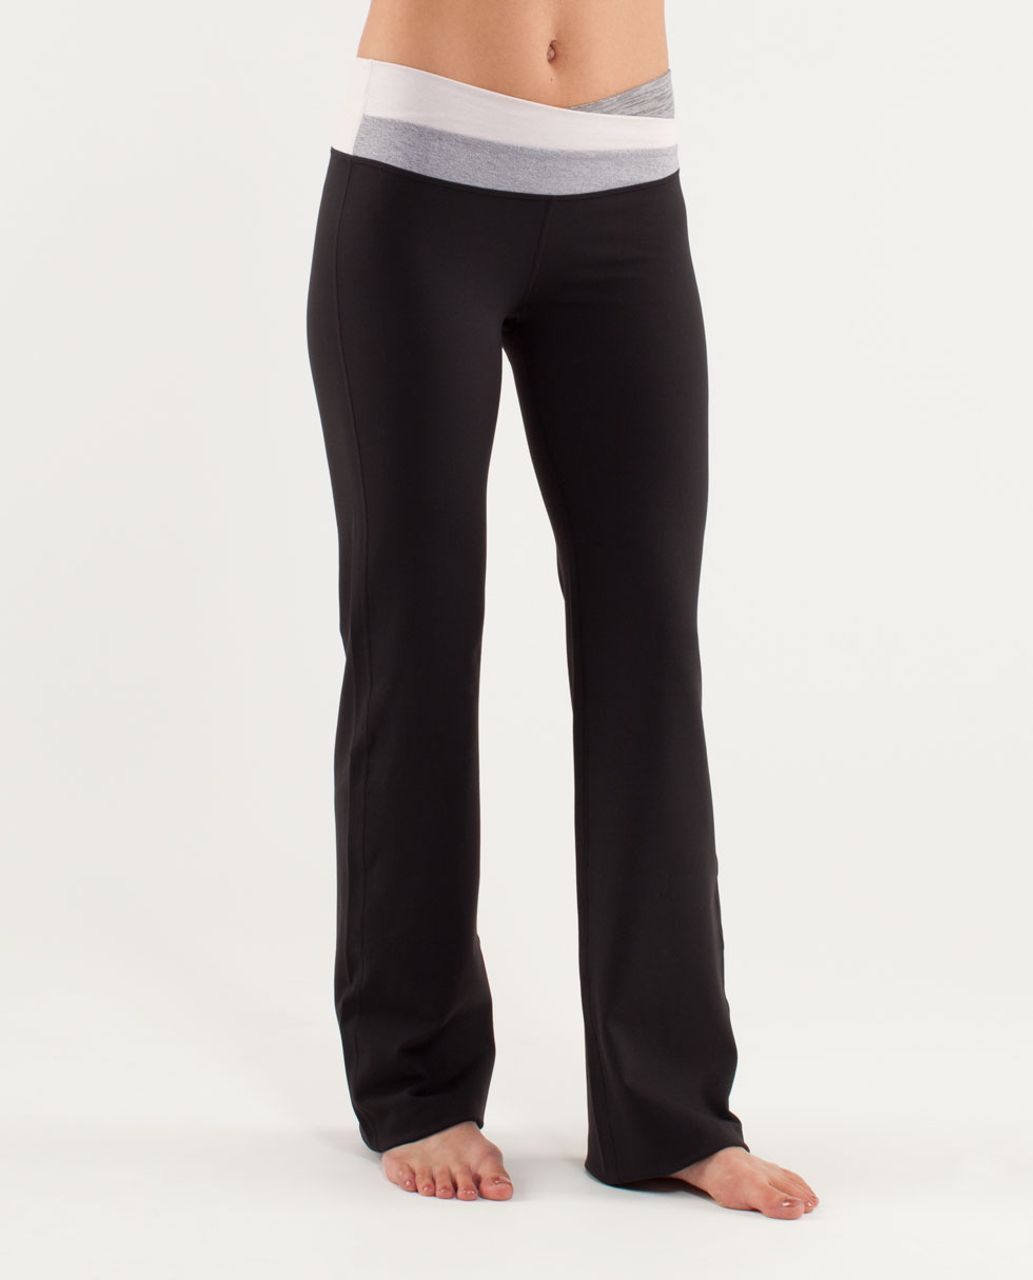 Lululemon Astro Pant (Regular) - Black /  Wee Are From Space Coal Fossil /  Heathered Dune